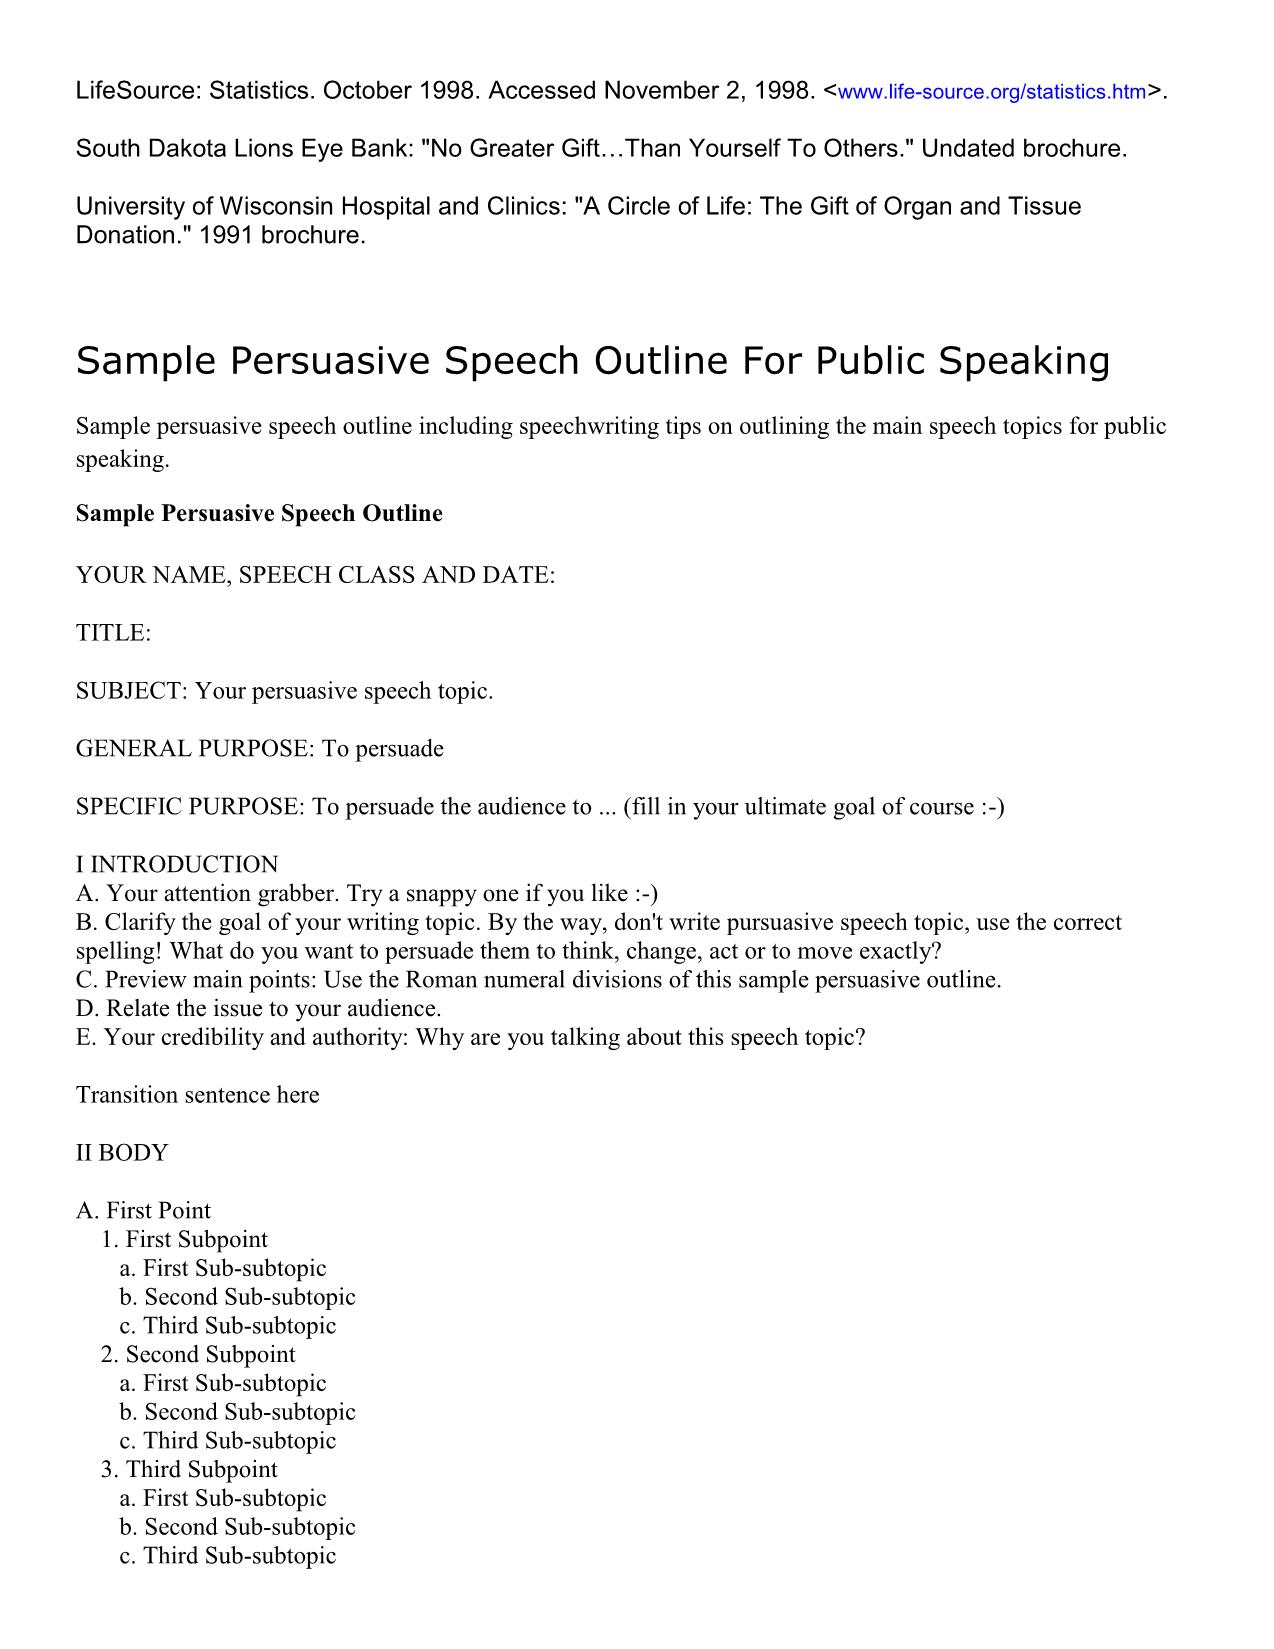 How to write an outline for a persuasive speech trang 5